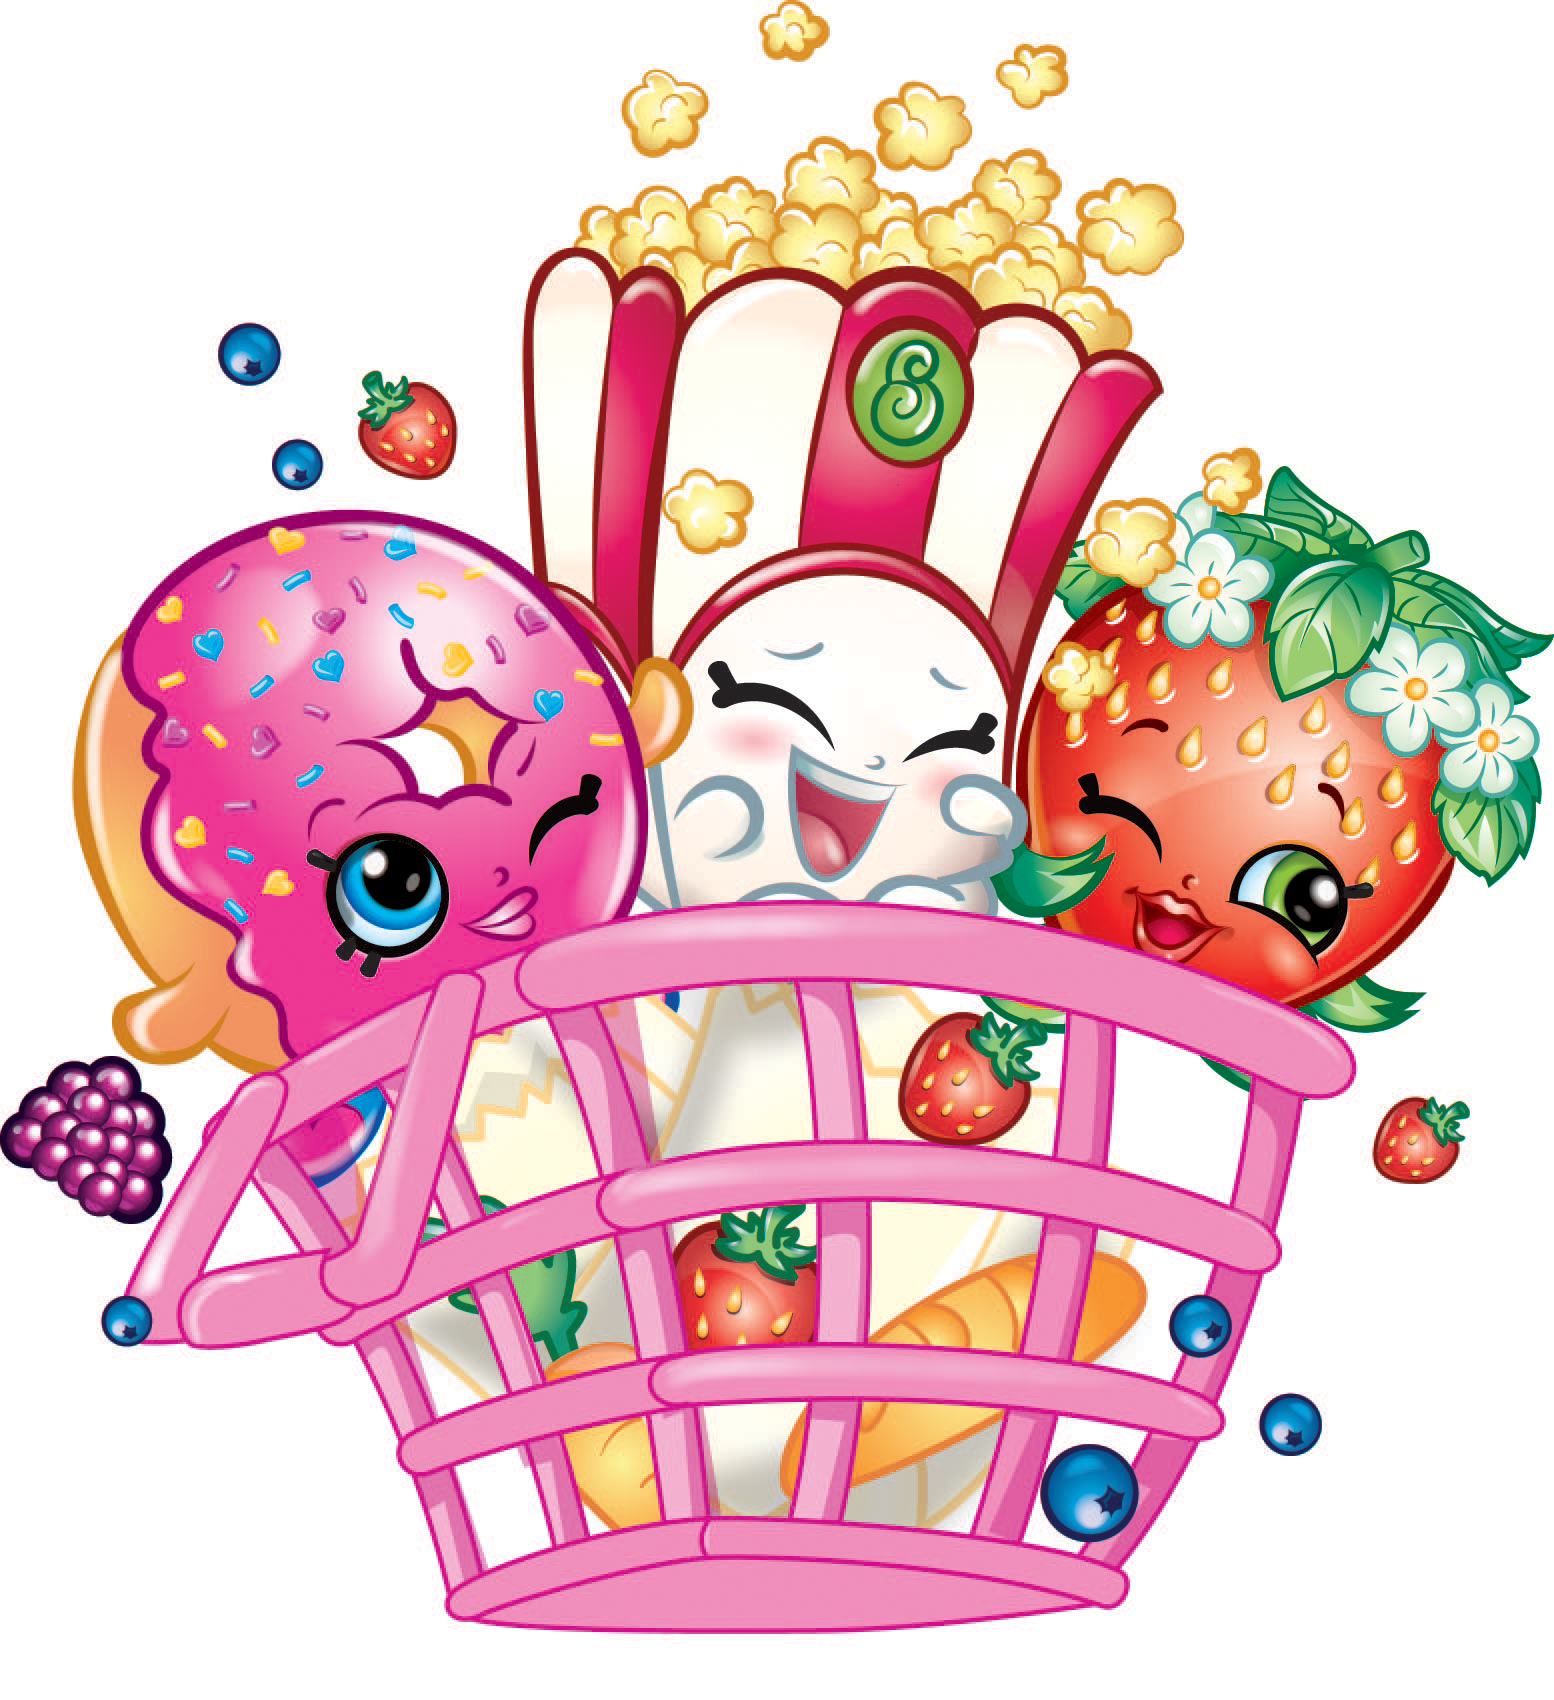 Shopkins Snaps Up More New Partners